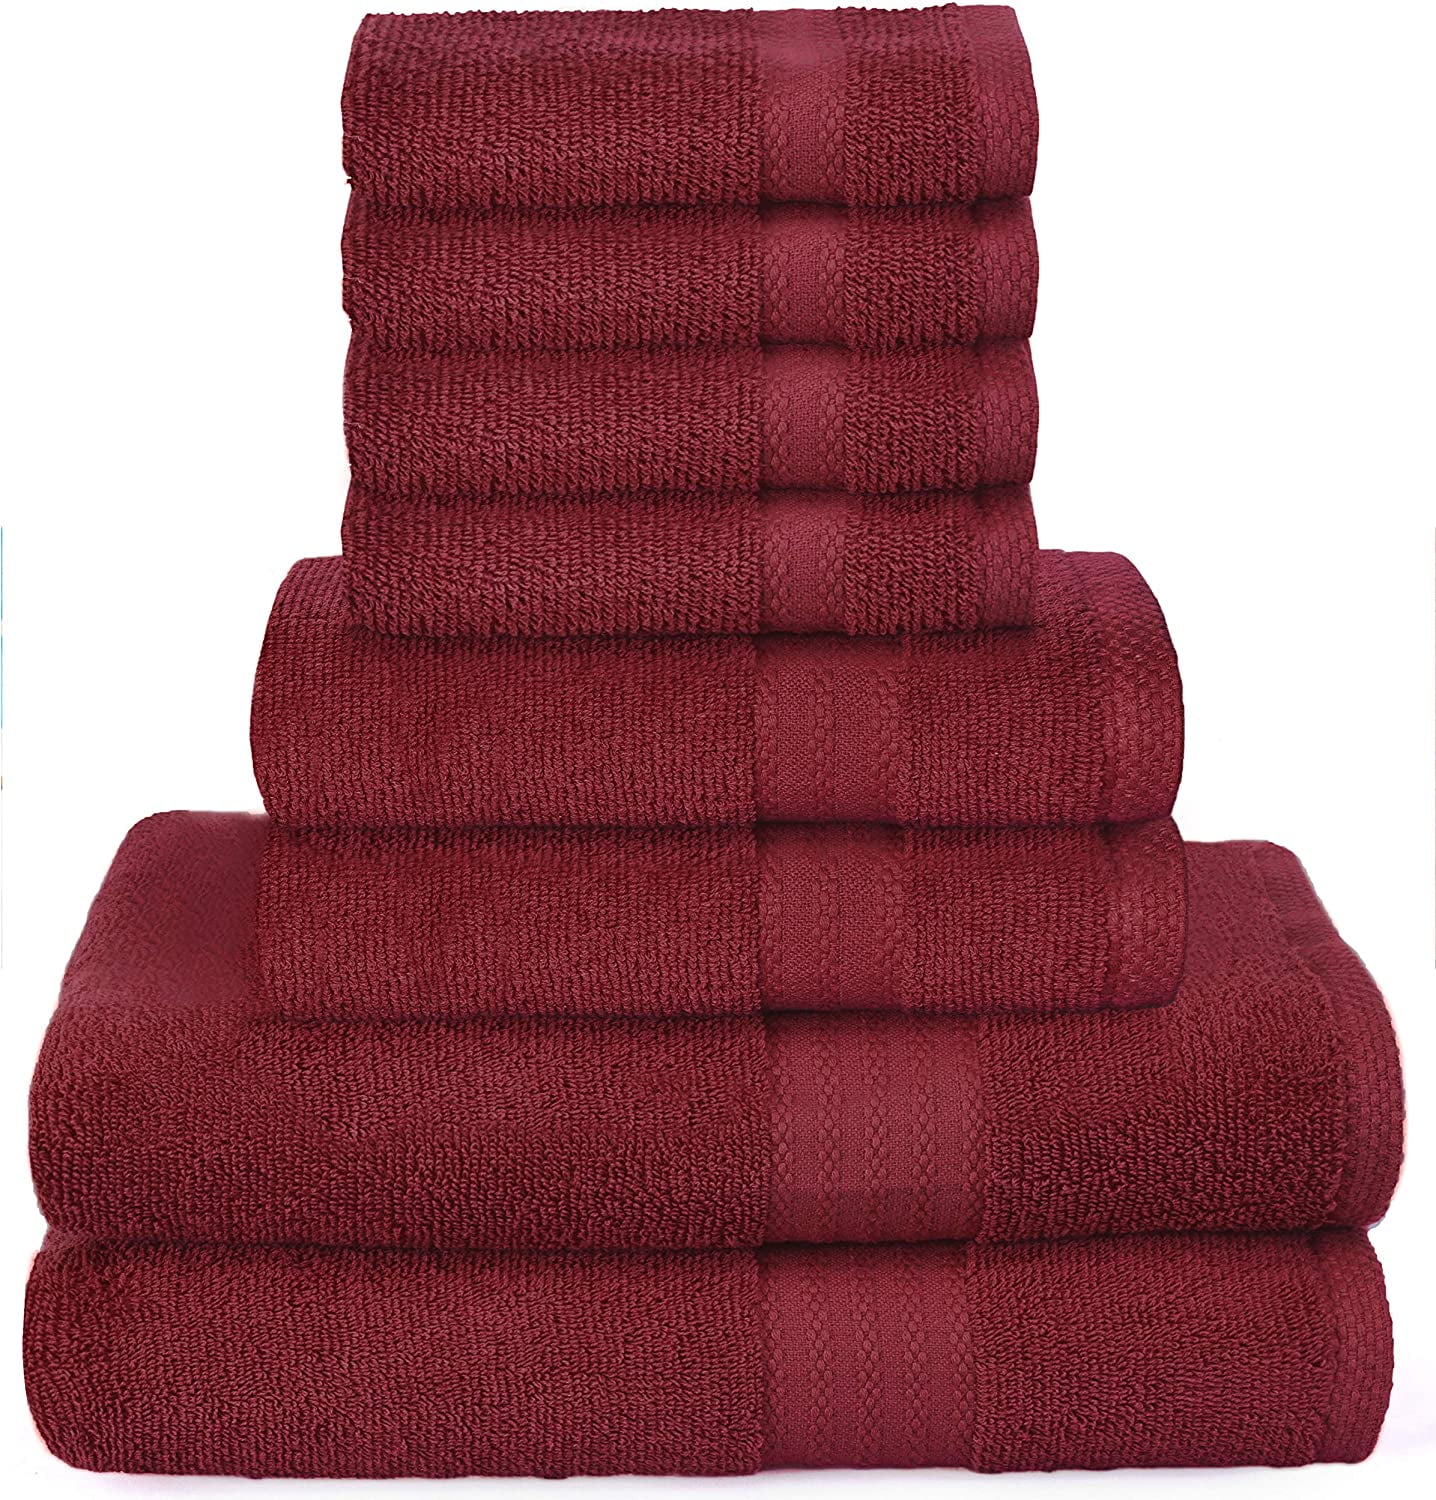 GLAMBURG Ultra Soft 8-Piece Towel Set - 100% Pure Ringspun Cotton, Contains 2 Oversized Bath Towels 27x54, 2 Hand Towels 16x28, 4 Wash Cloths 13x13 - Ideal for Everyday use, Hotel & Spa - Burgundy